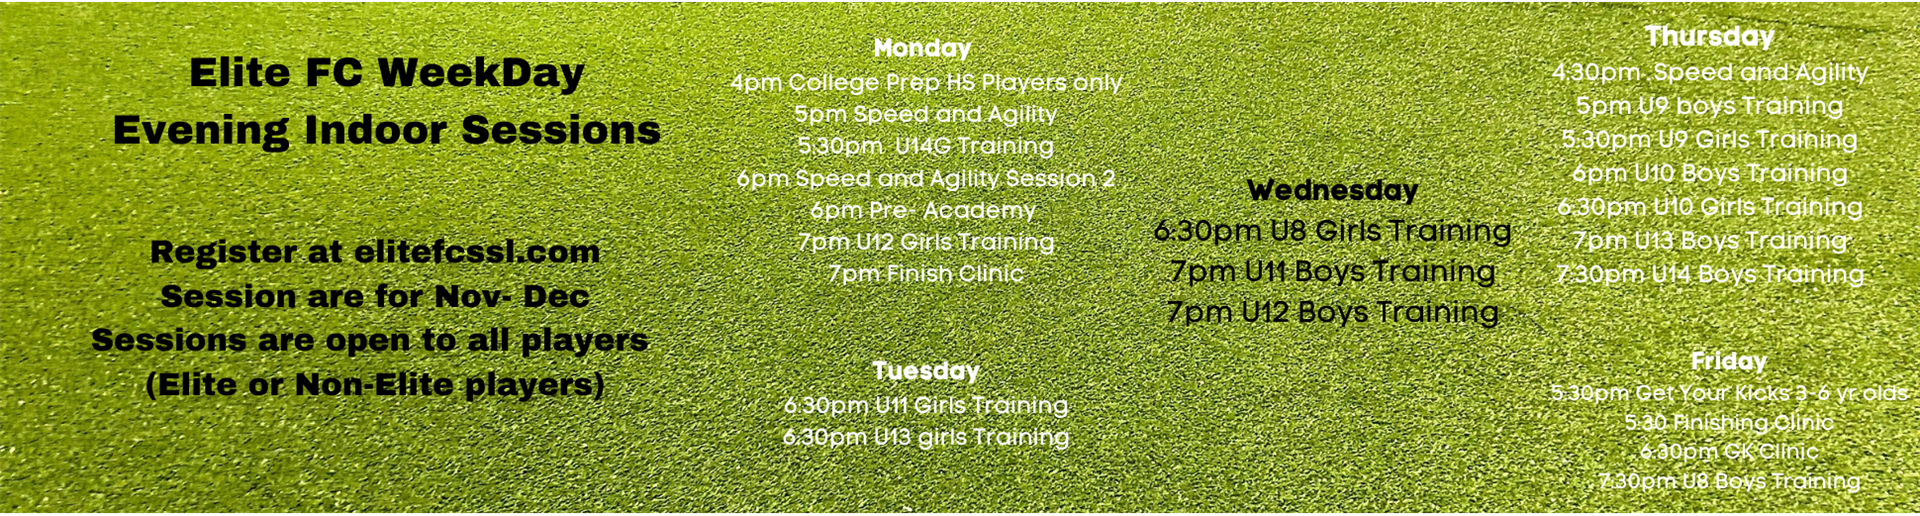 Weekday Training Sessions